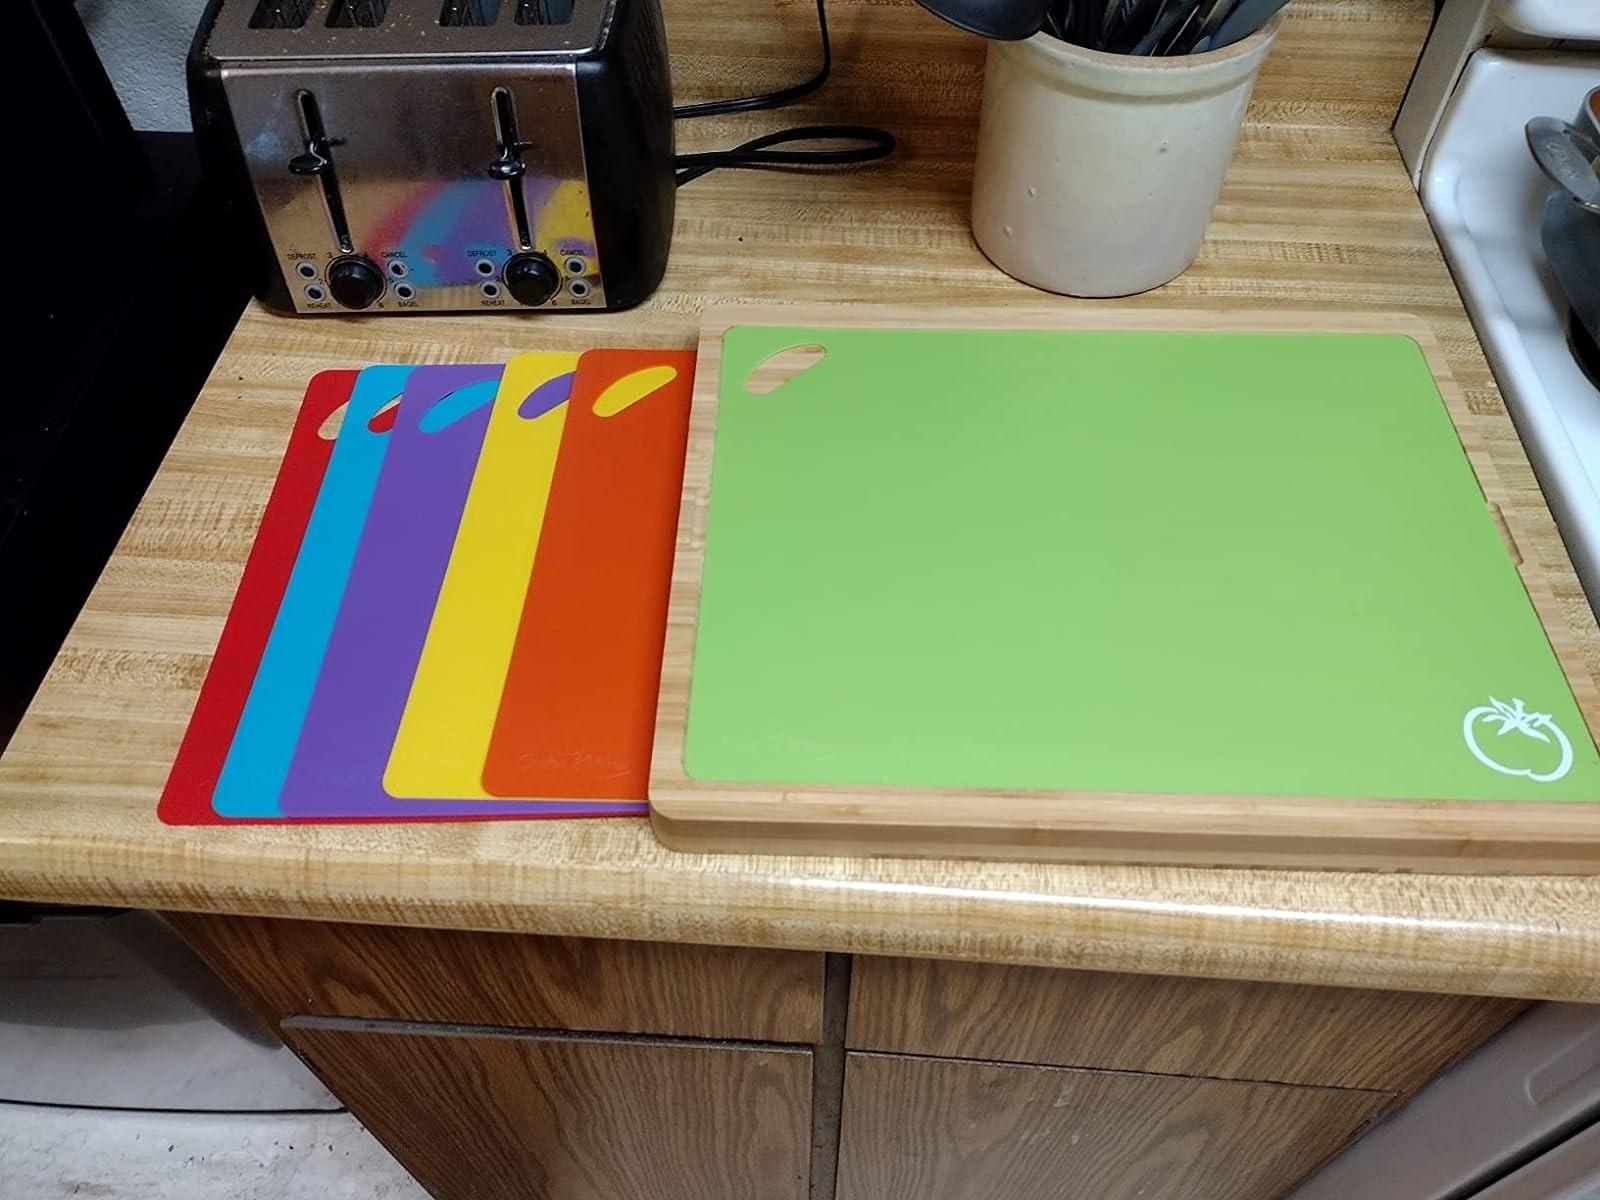 the cutting board and colorful trays